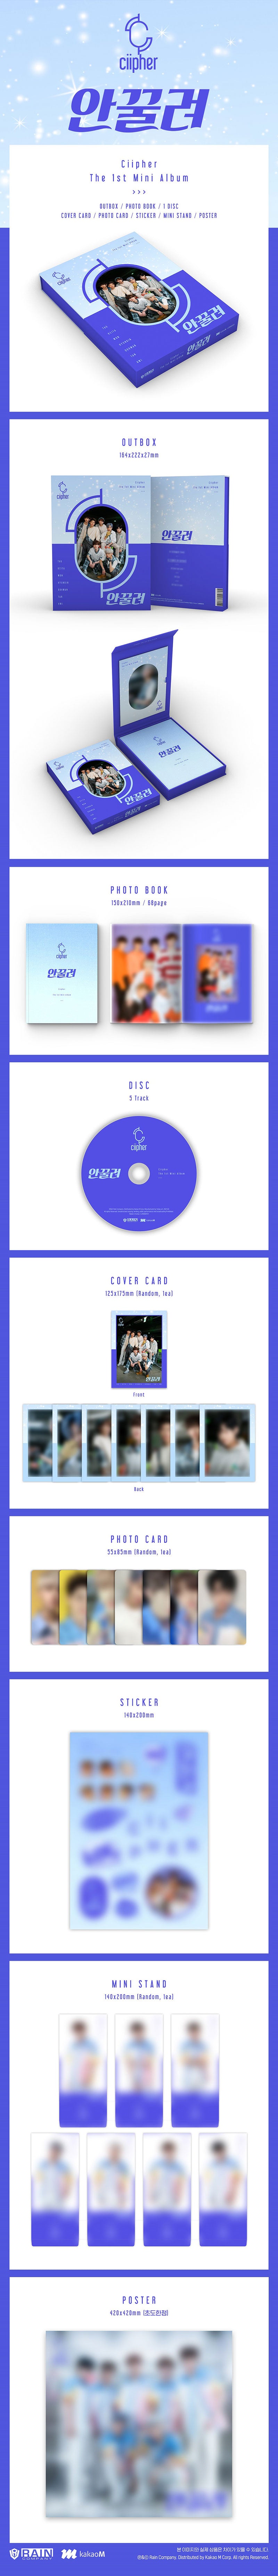 1 CD
1 Photo Book (68 pages)
1 Cover Card
1 Photo Card
1 Sticker
1 Mini Stand